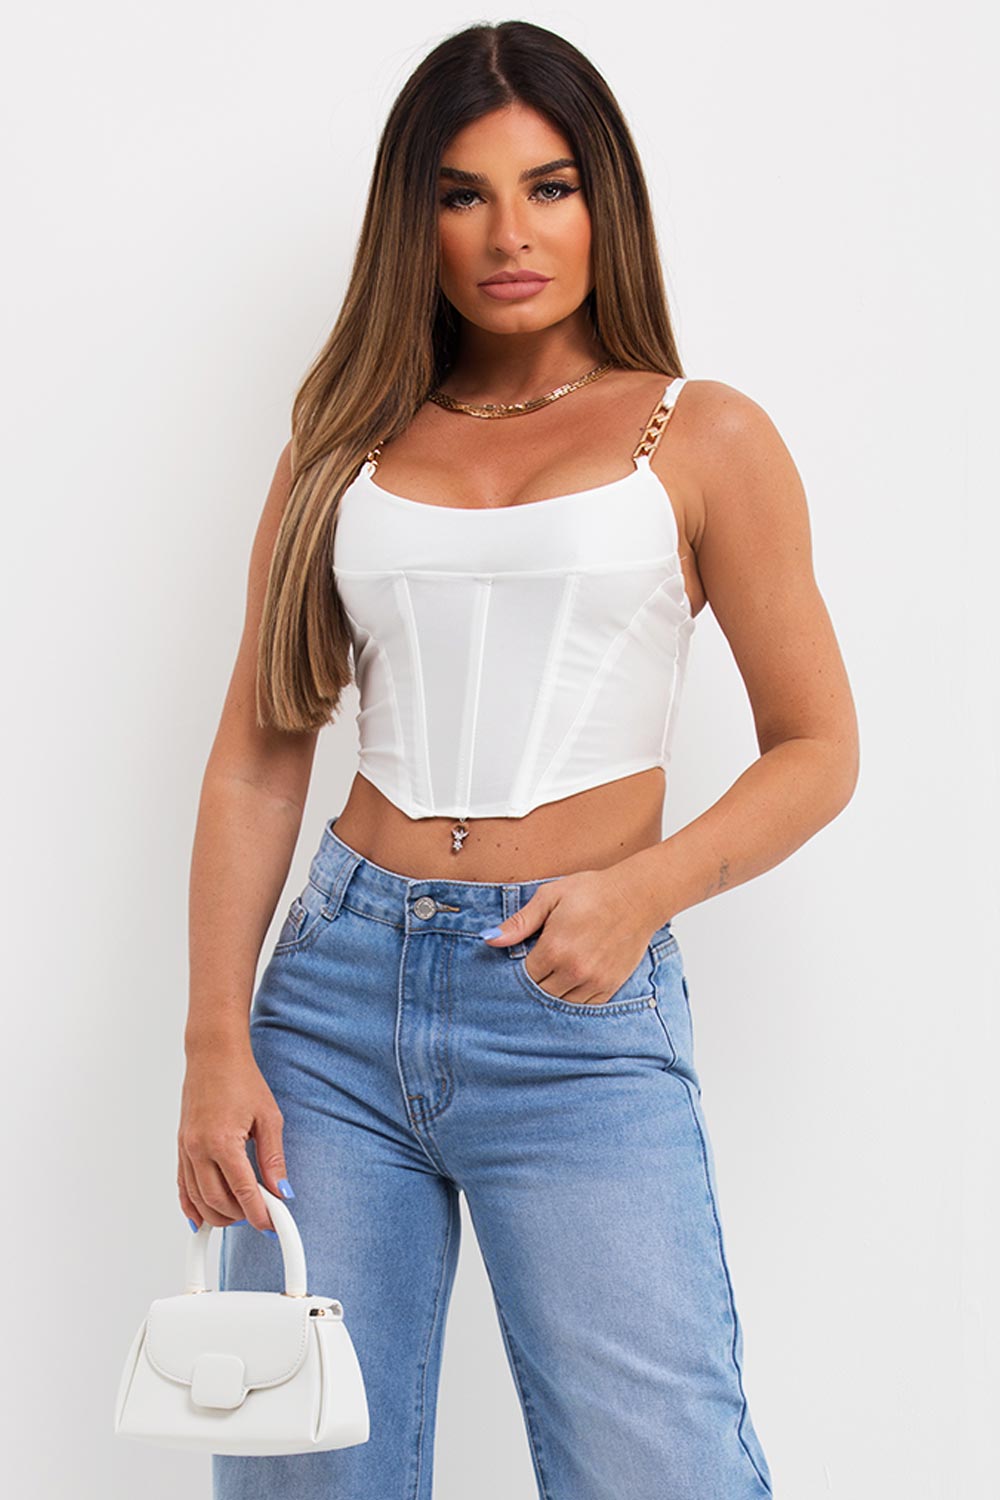 white croset top with gold chain